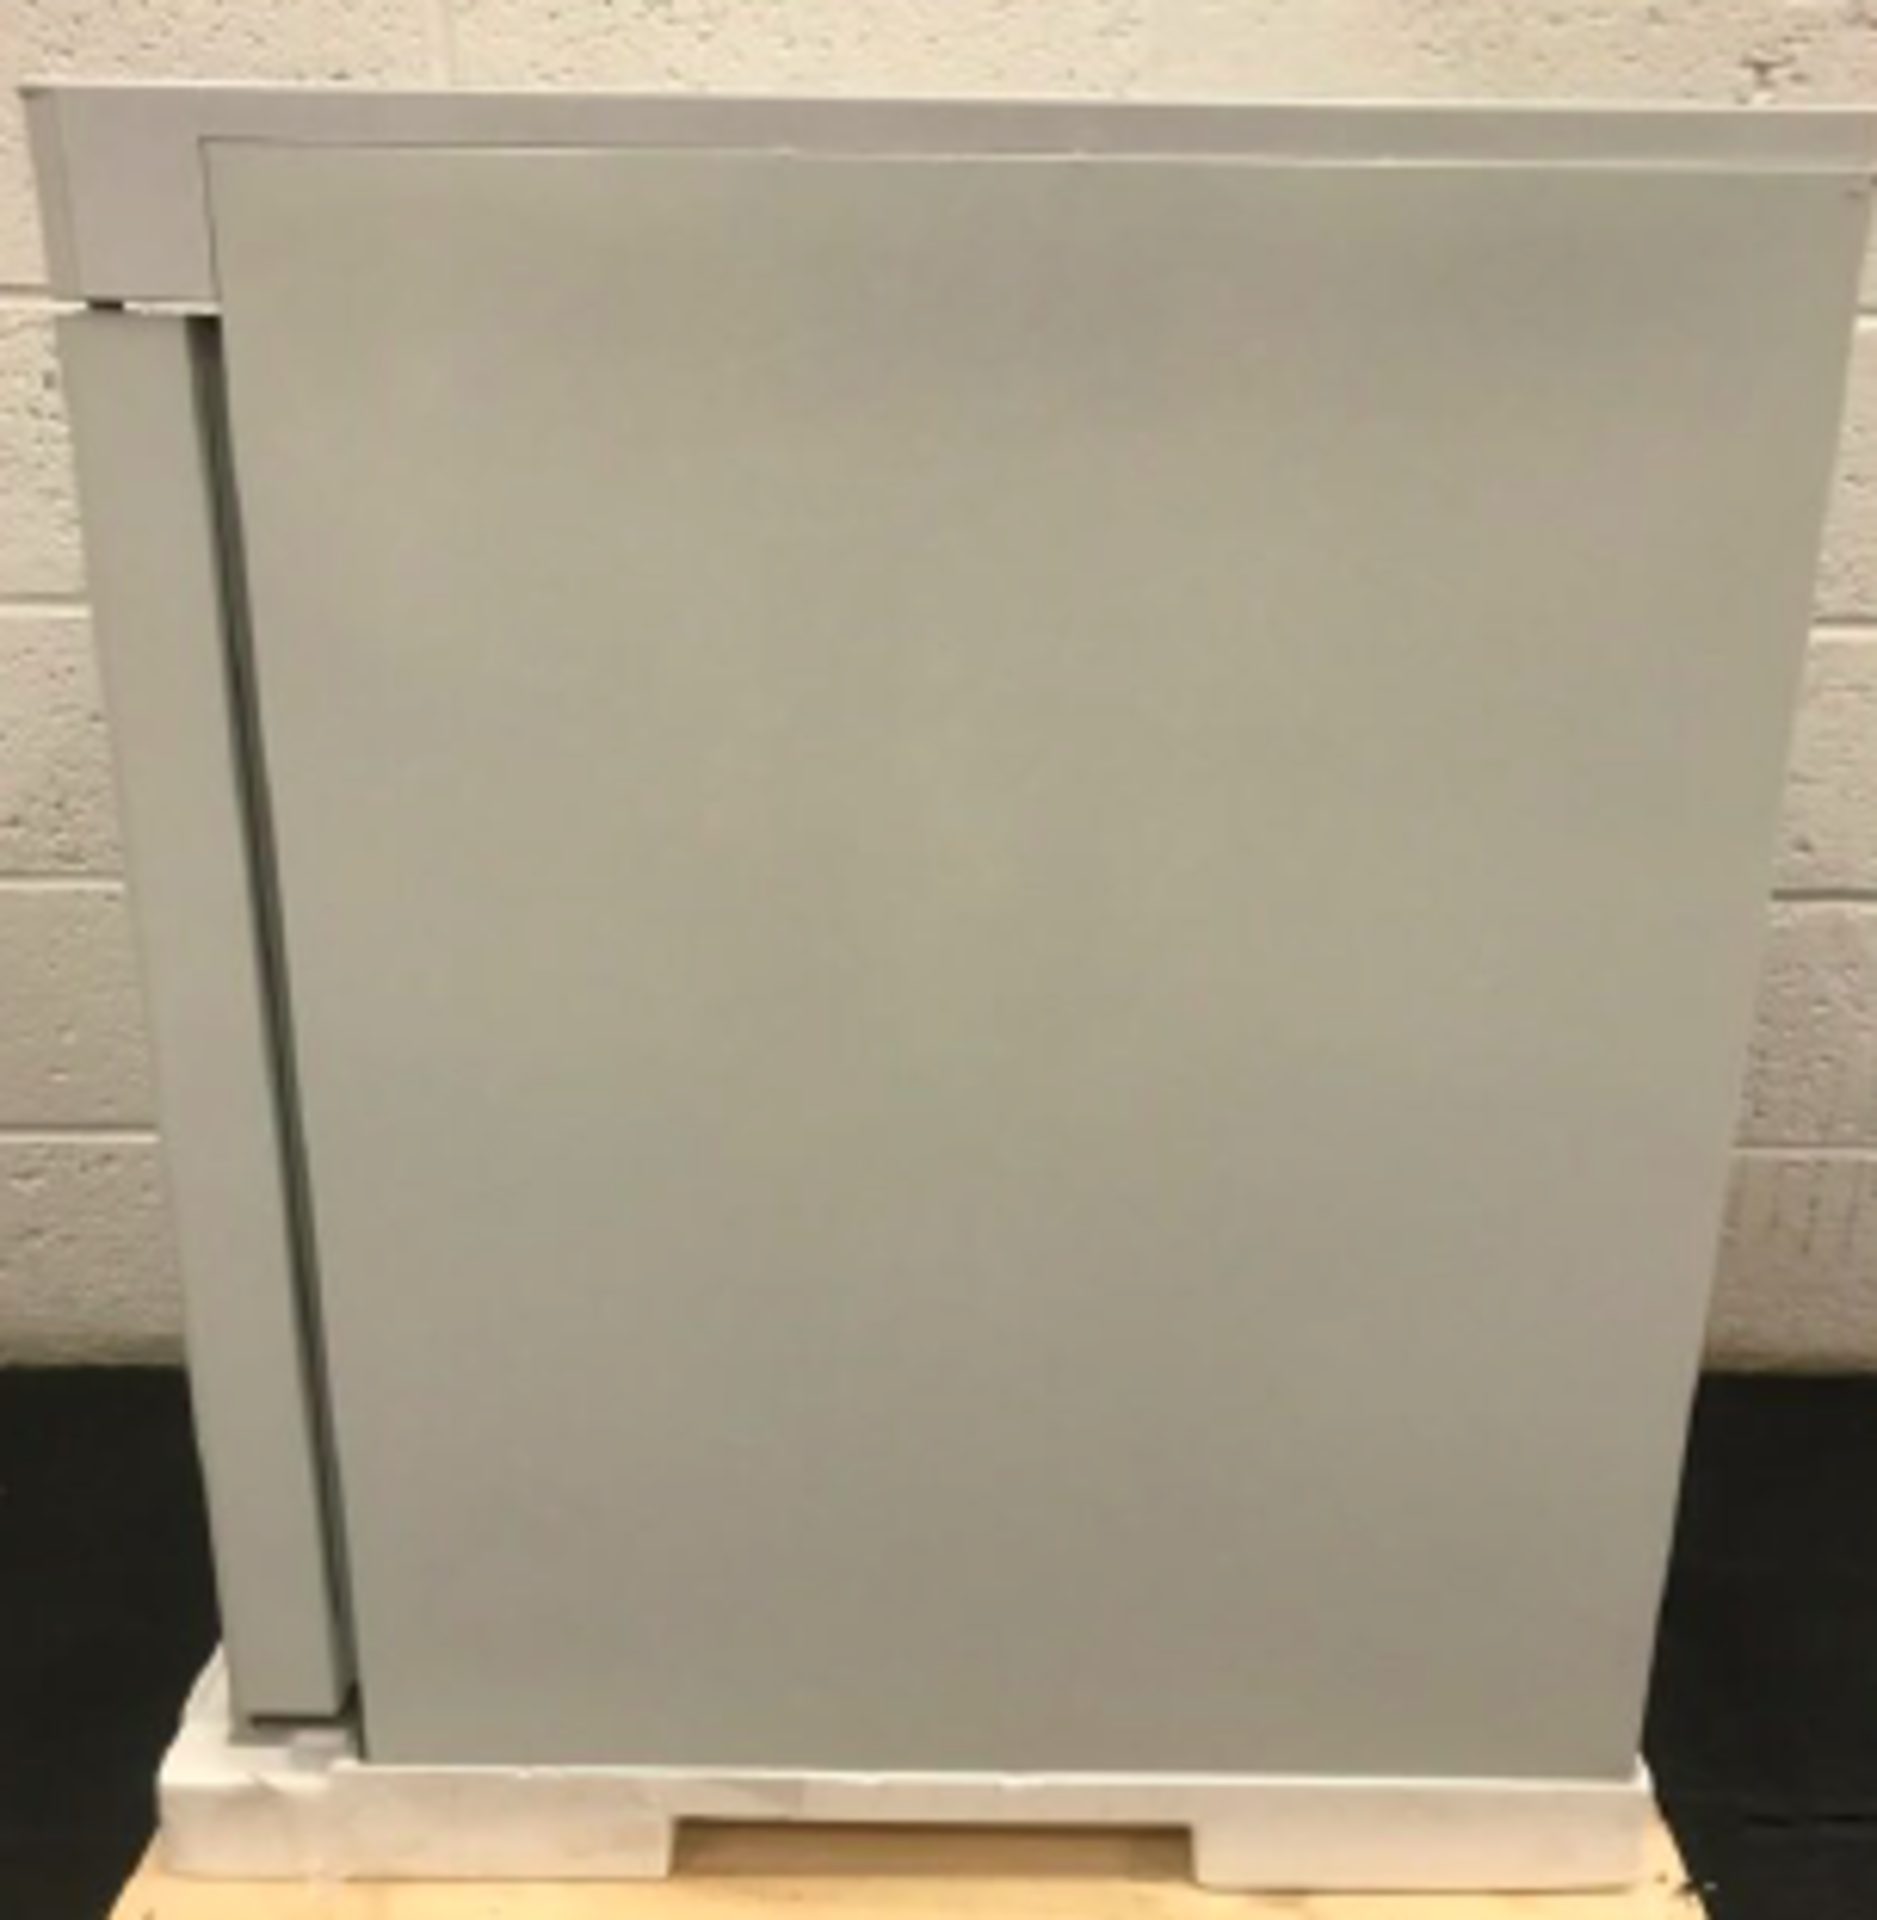 Compact K 210 LG 3W undercounter refrigerator - Image 4 of 10